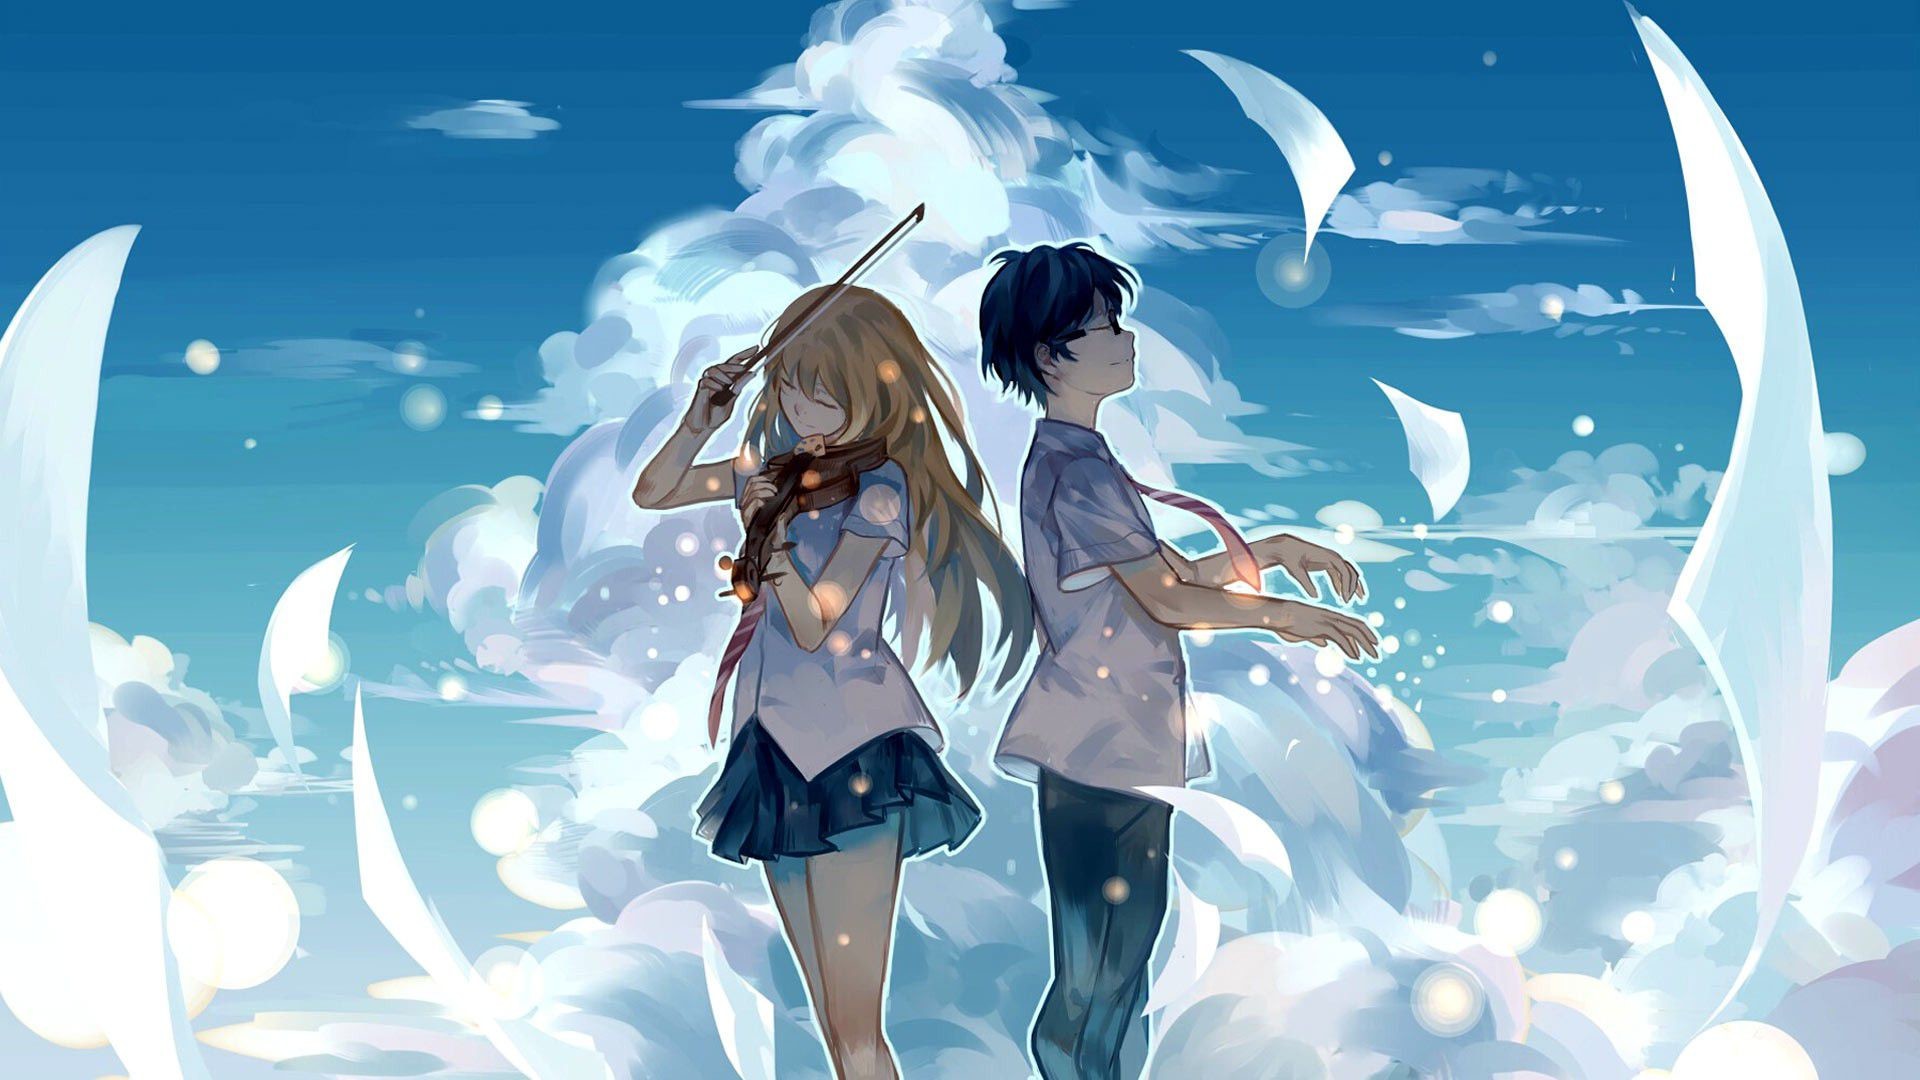 Anime Couple Gift Blue Glare Lights Background HD Anime Girl Wallpapers   HD Wallpapers  ID 79130